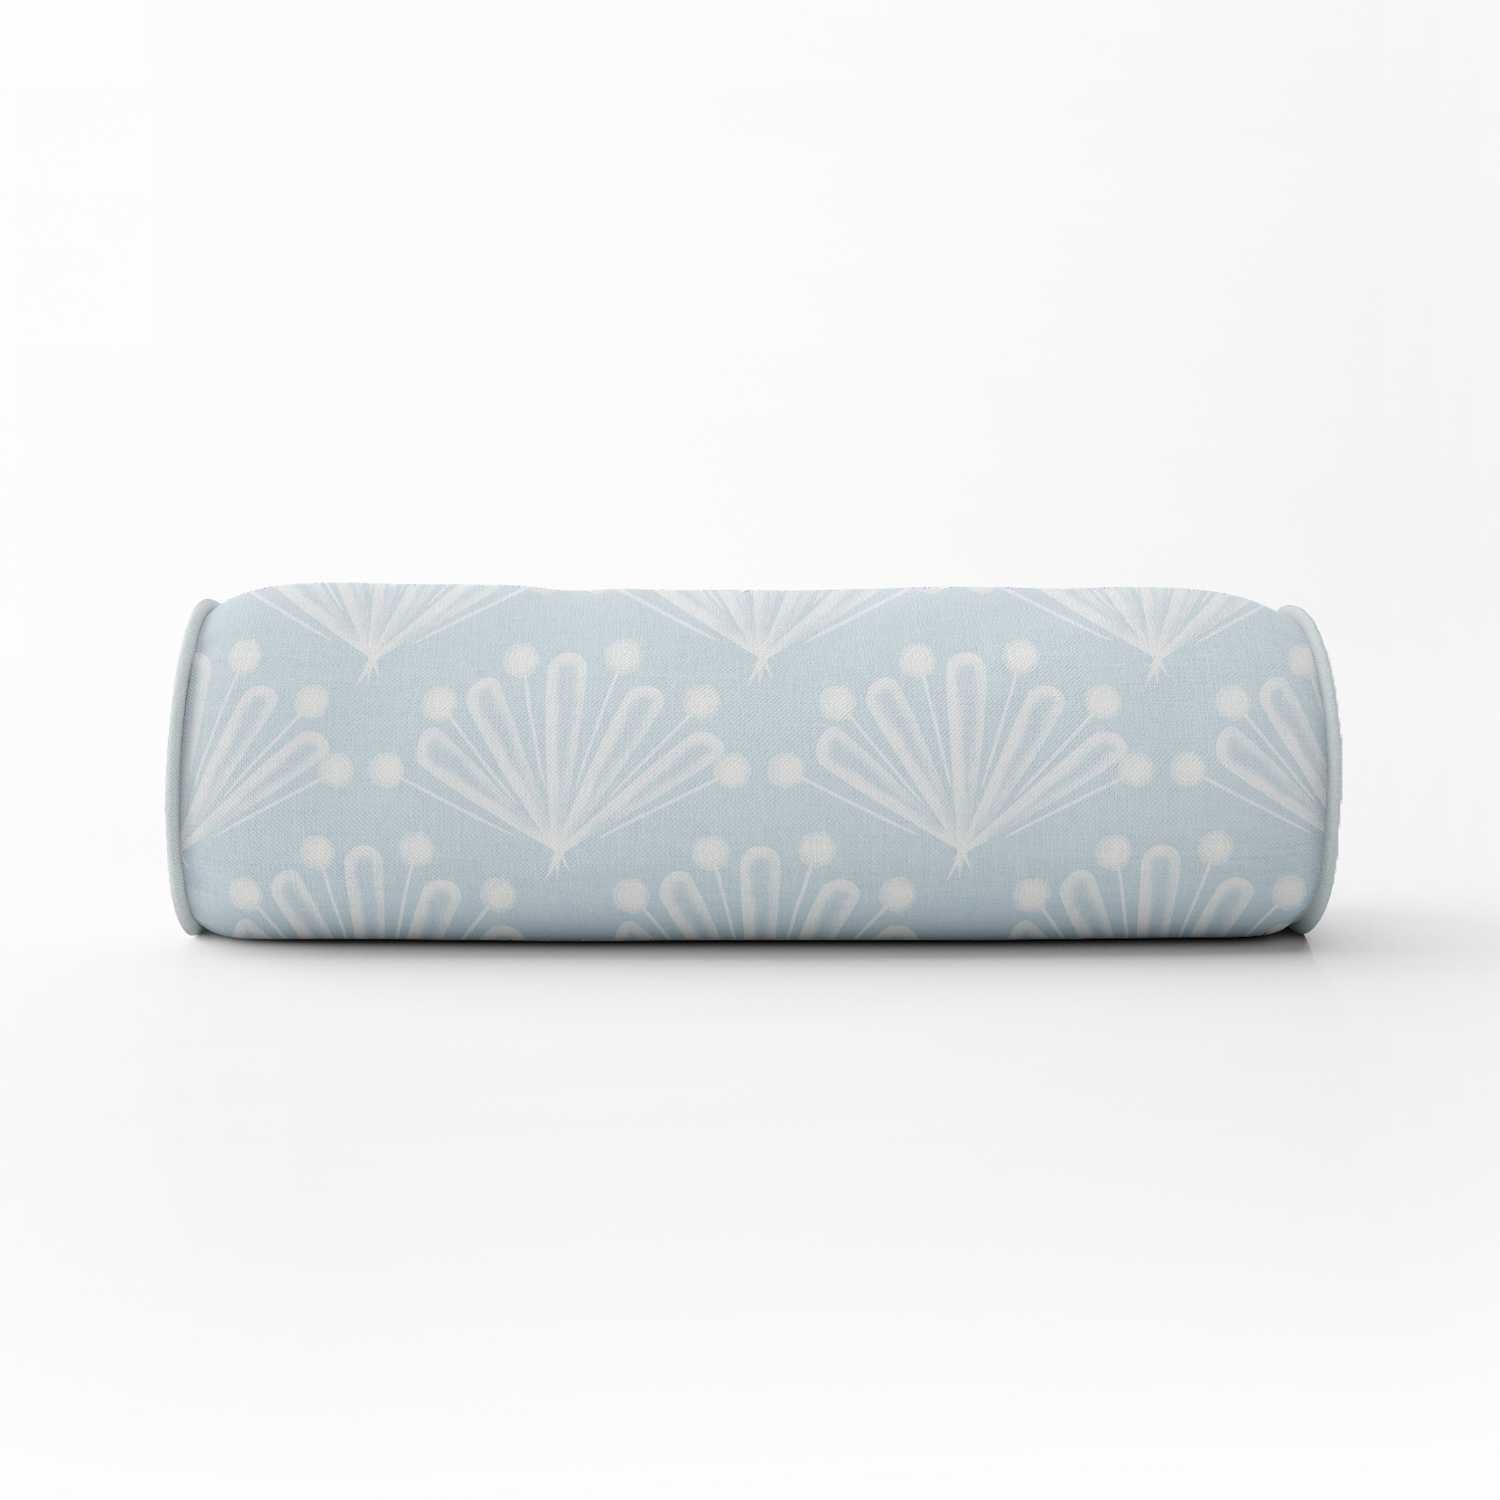 large-scale-baby-blue-flower-bolster-blue-piping.jpg